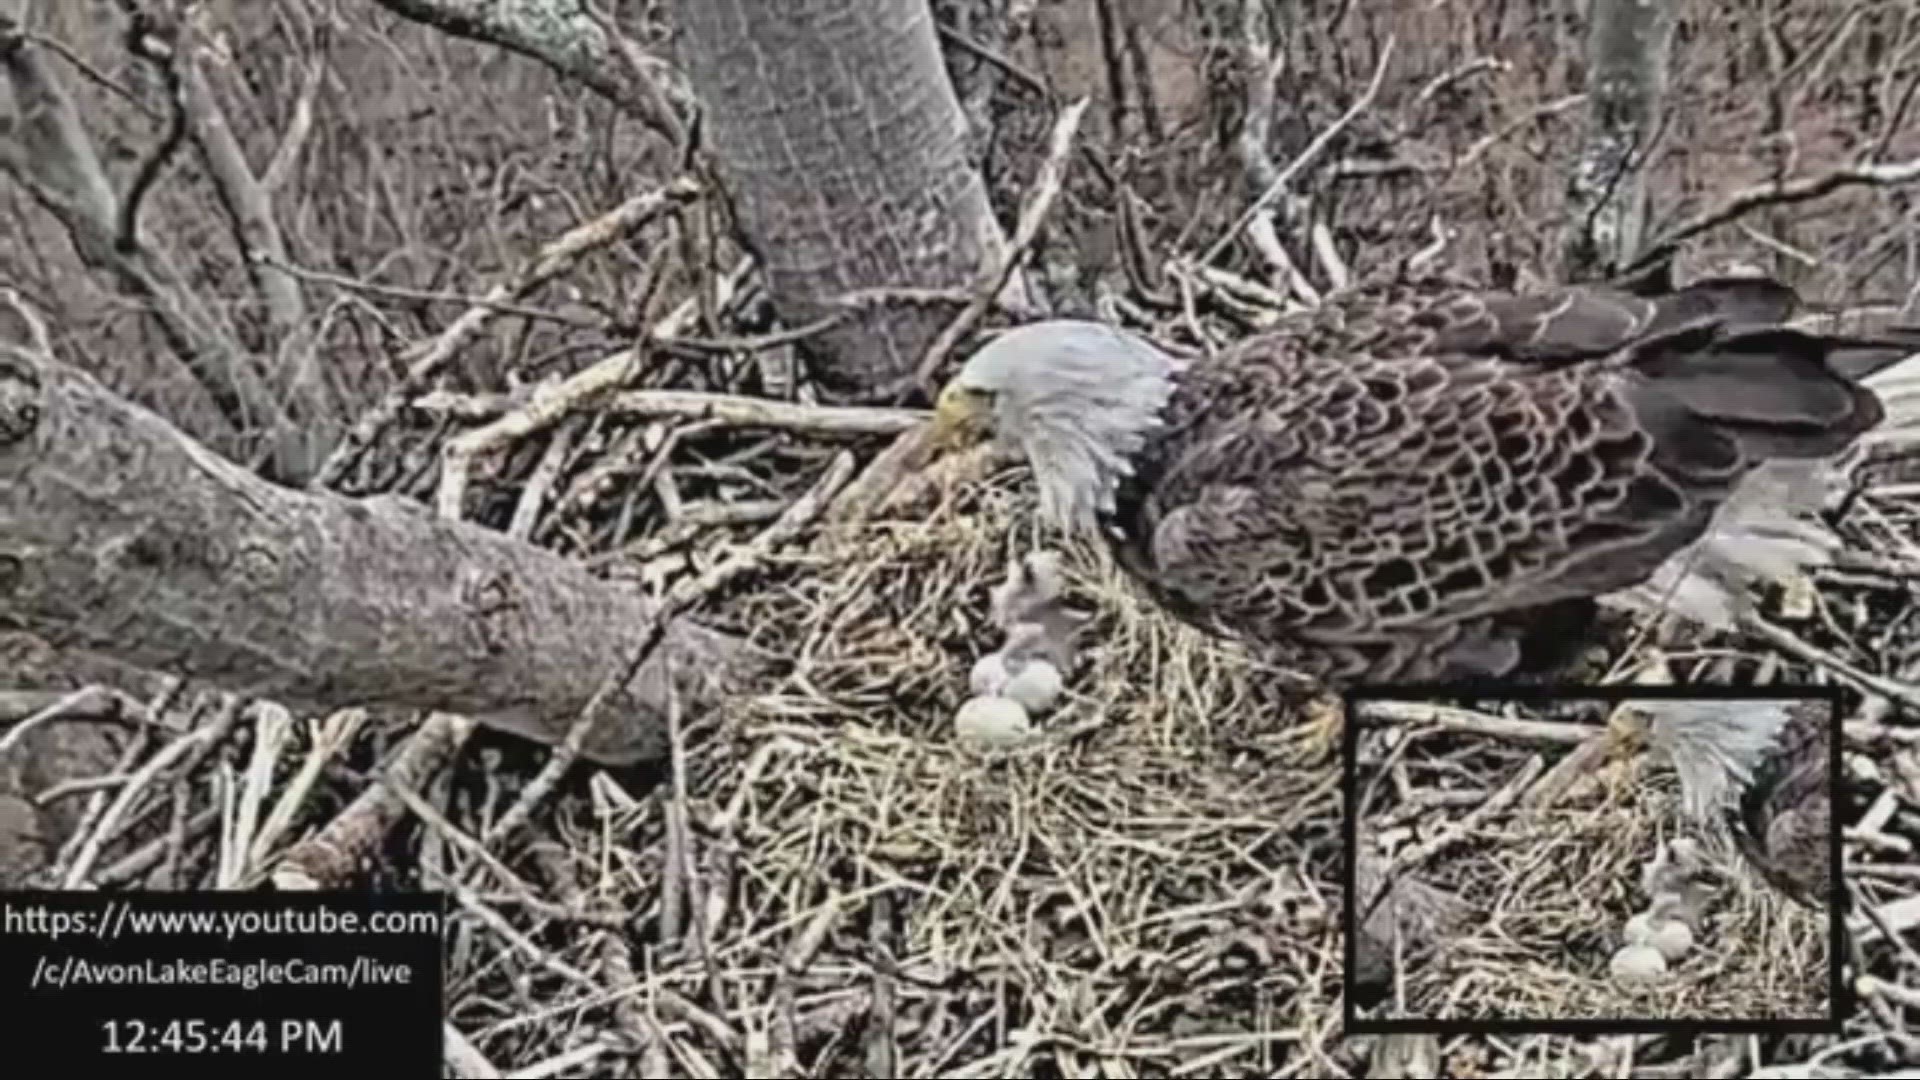 There’s a new baby eagle in Northeast Ohio inside the nest at Redwood Elementary School in Avon Lake.